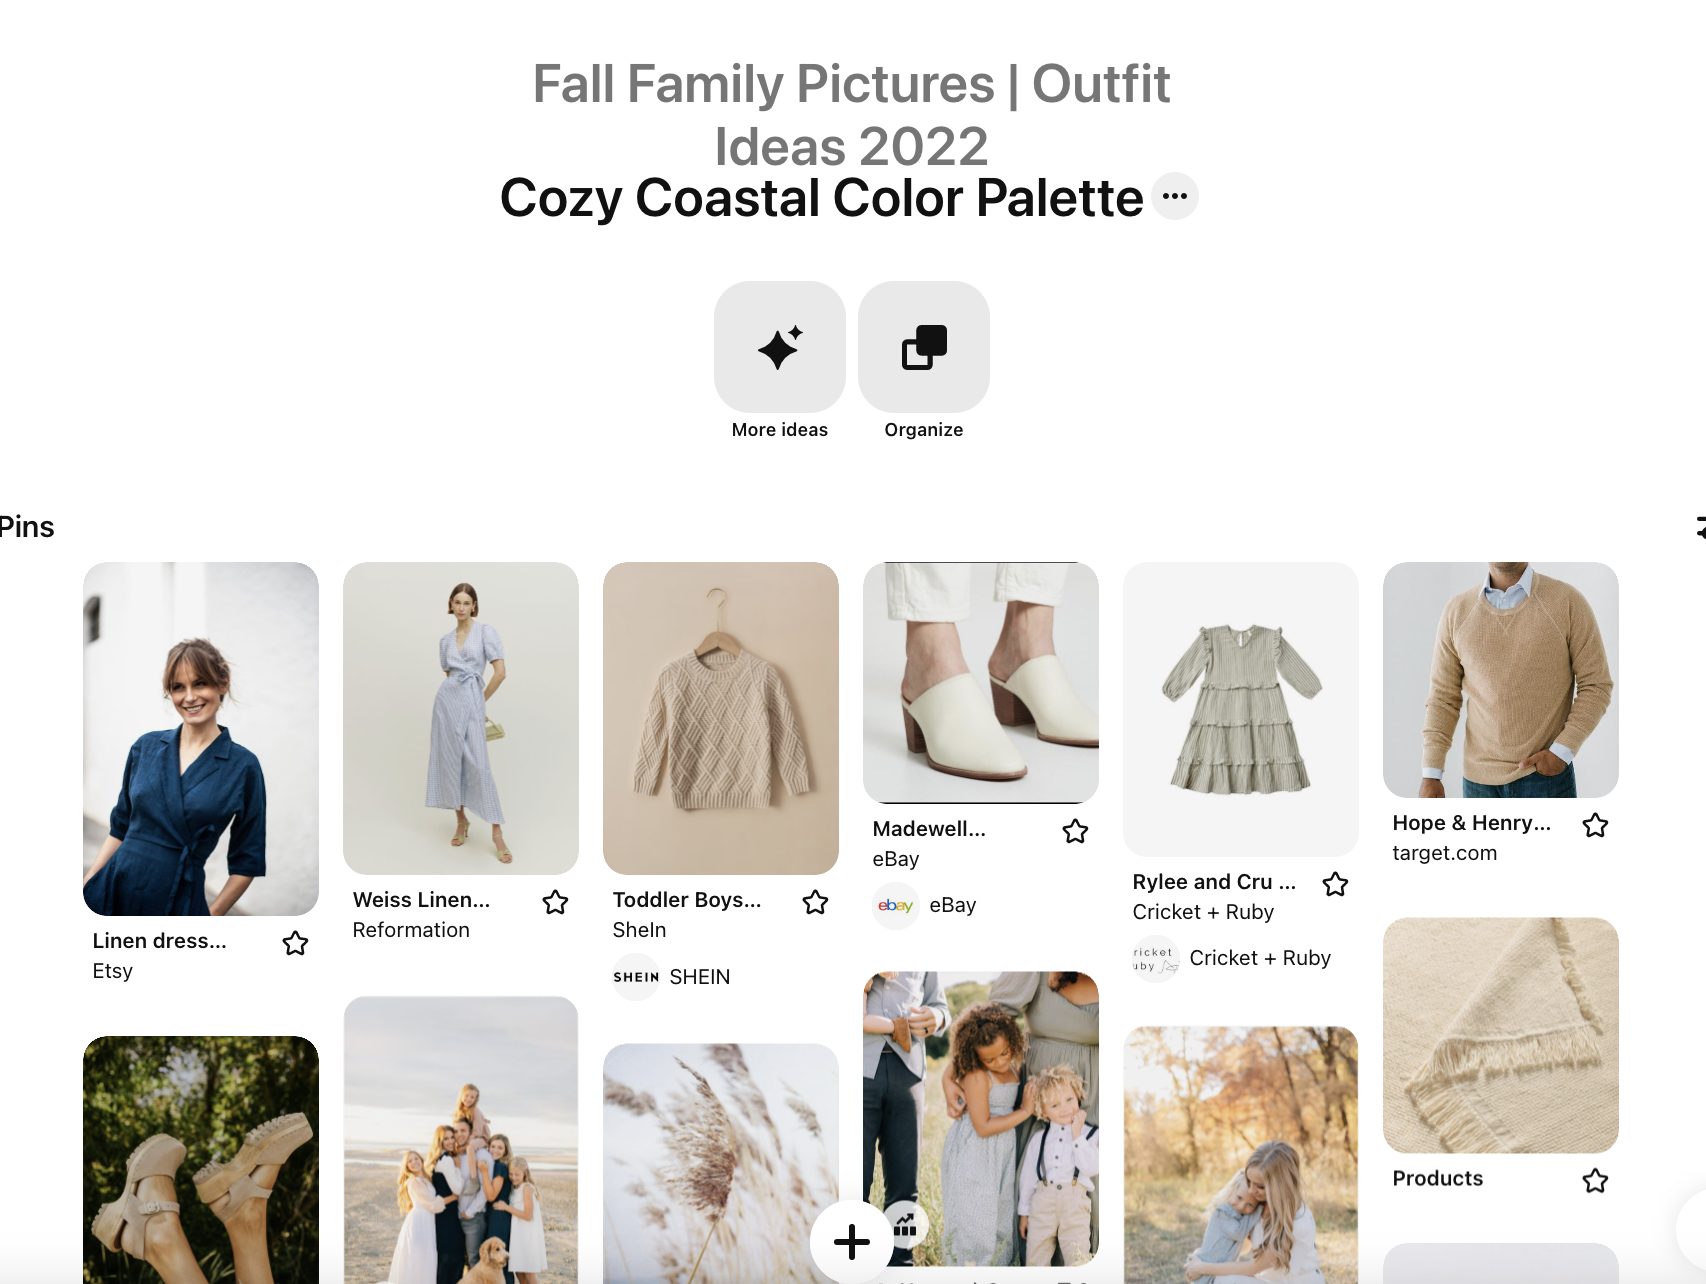 2022 Fall Family Pictures Inspiration from Pinterest 